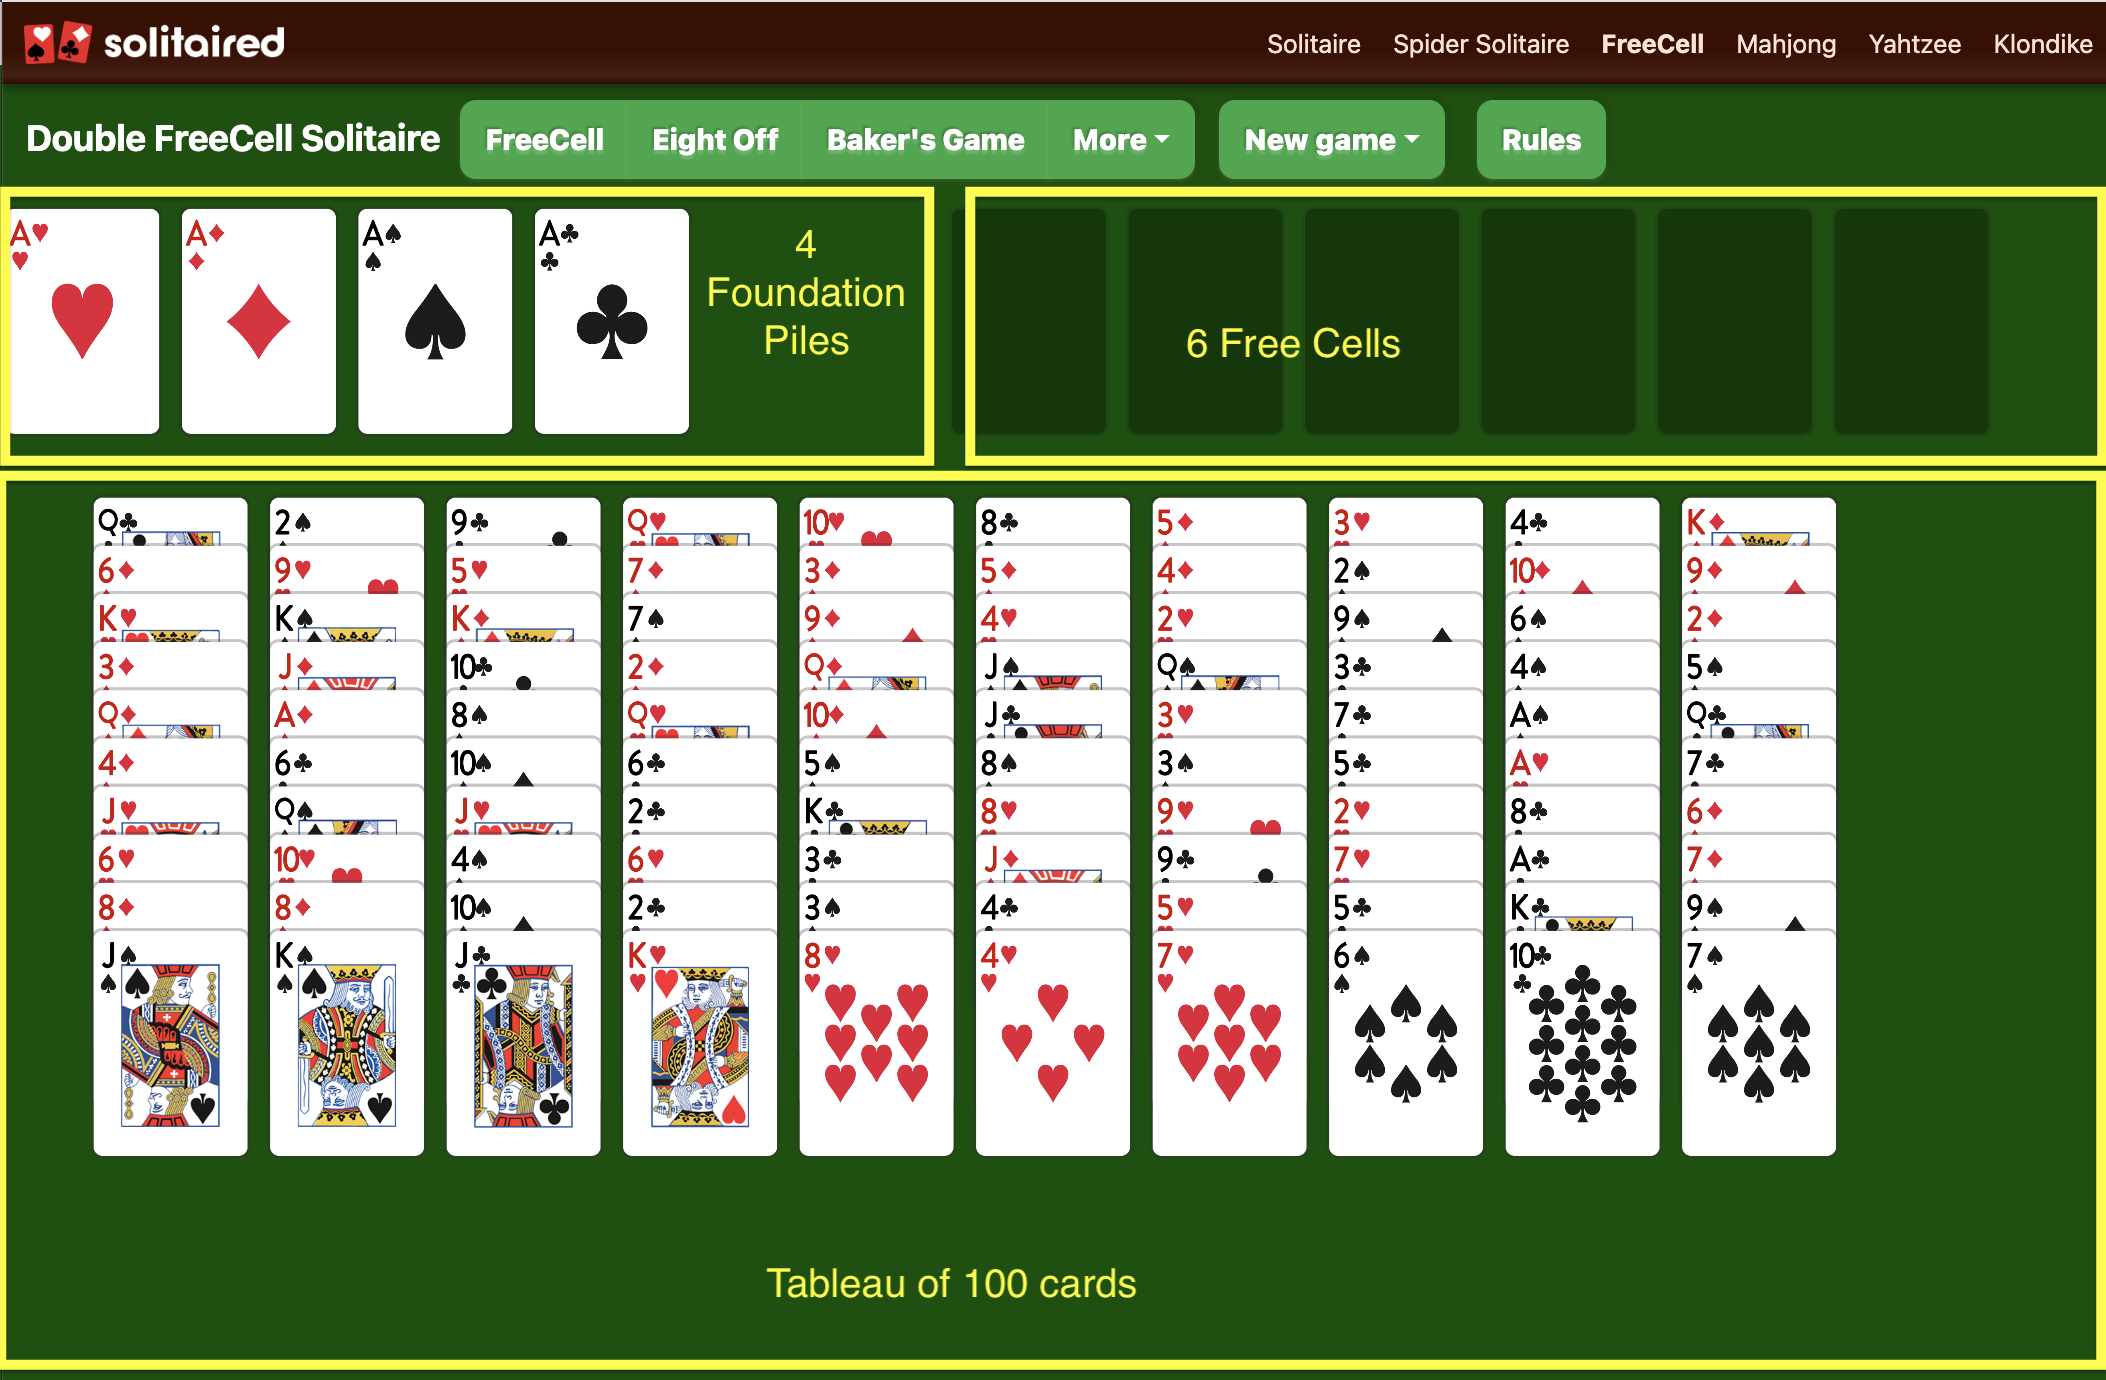 How to set up a game of Double FreeCell